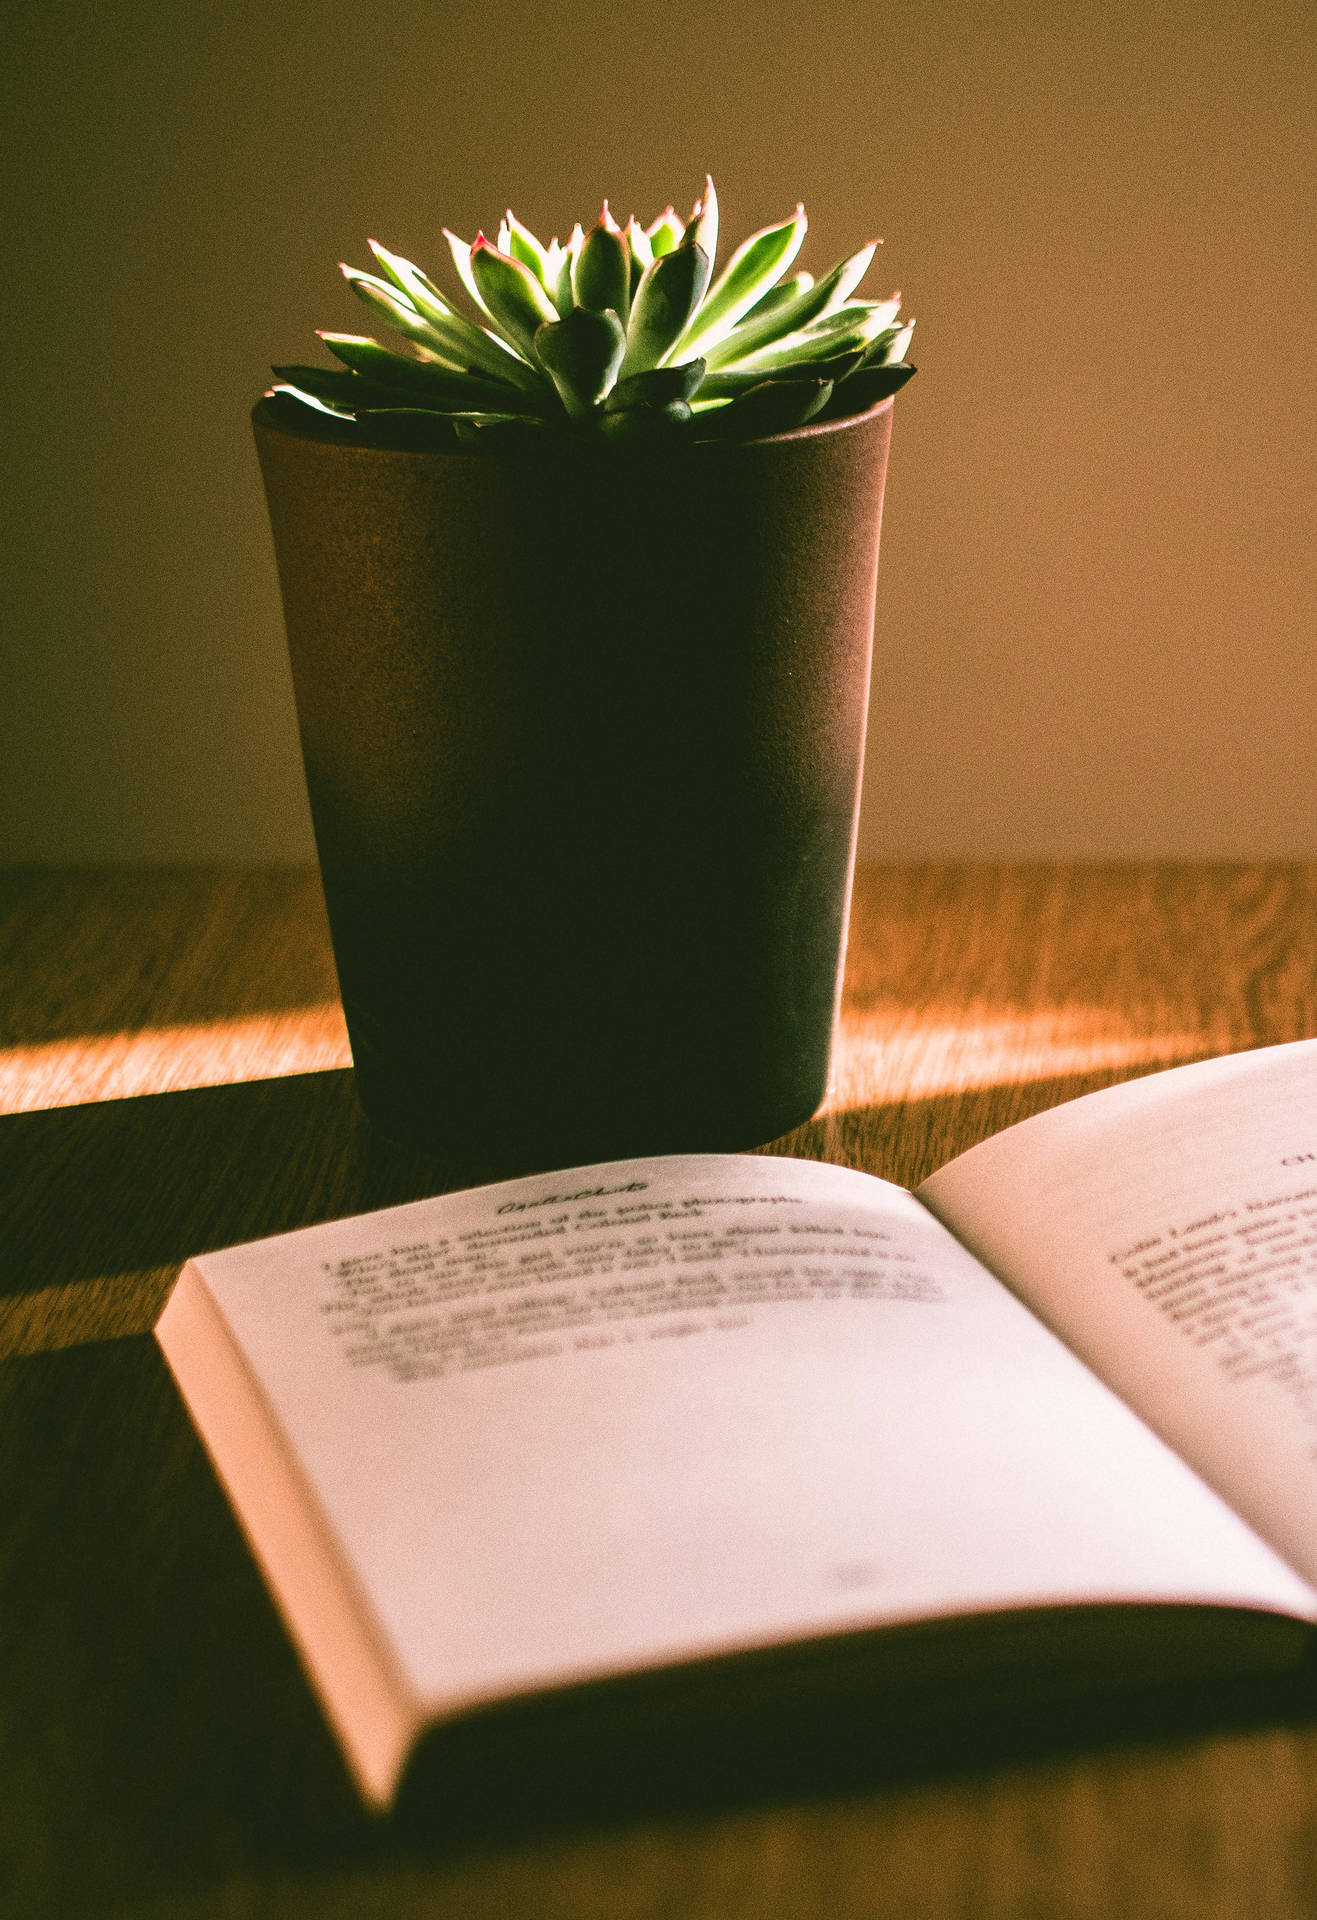 Study Motivation Book And Potted Plant Wallpaper